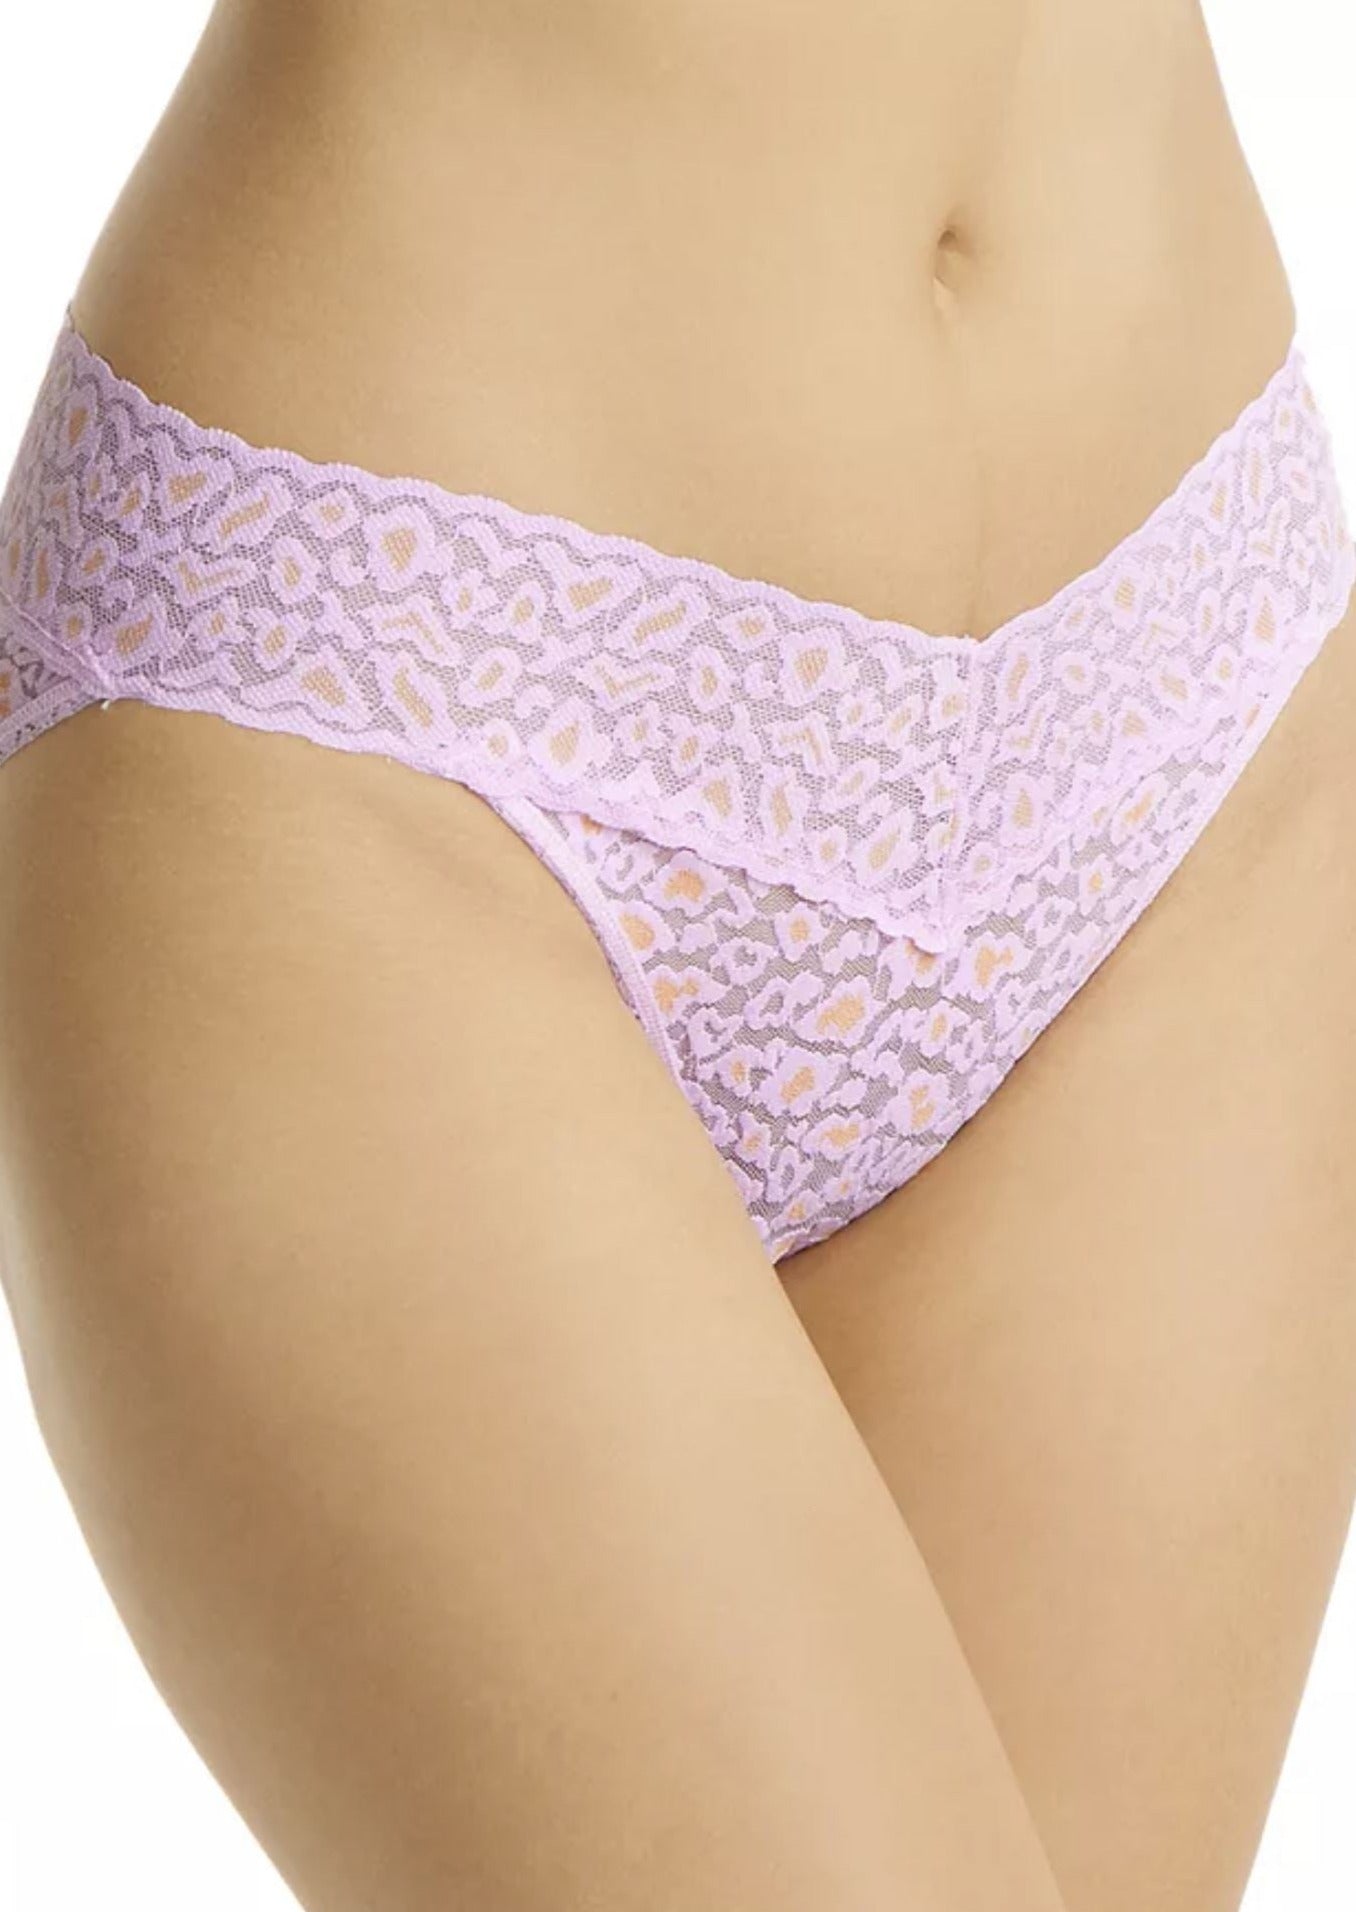 Hanky Panky Signature Lace X-Dye Leopard V-Kini Rose Petal Orange Blossom | Made in the USA | Classy Cozy Cool Women’s American Clothing Boutique